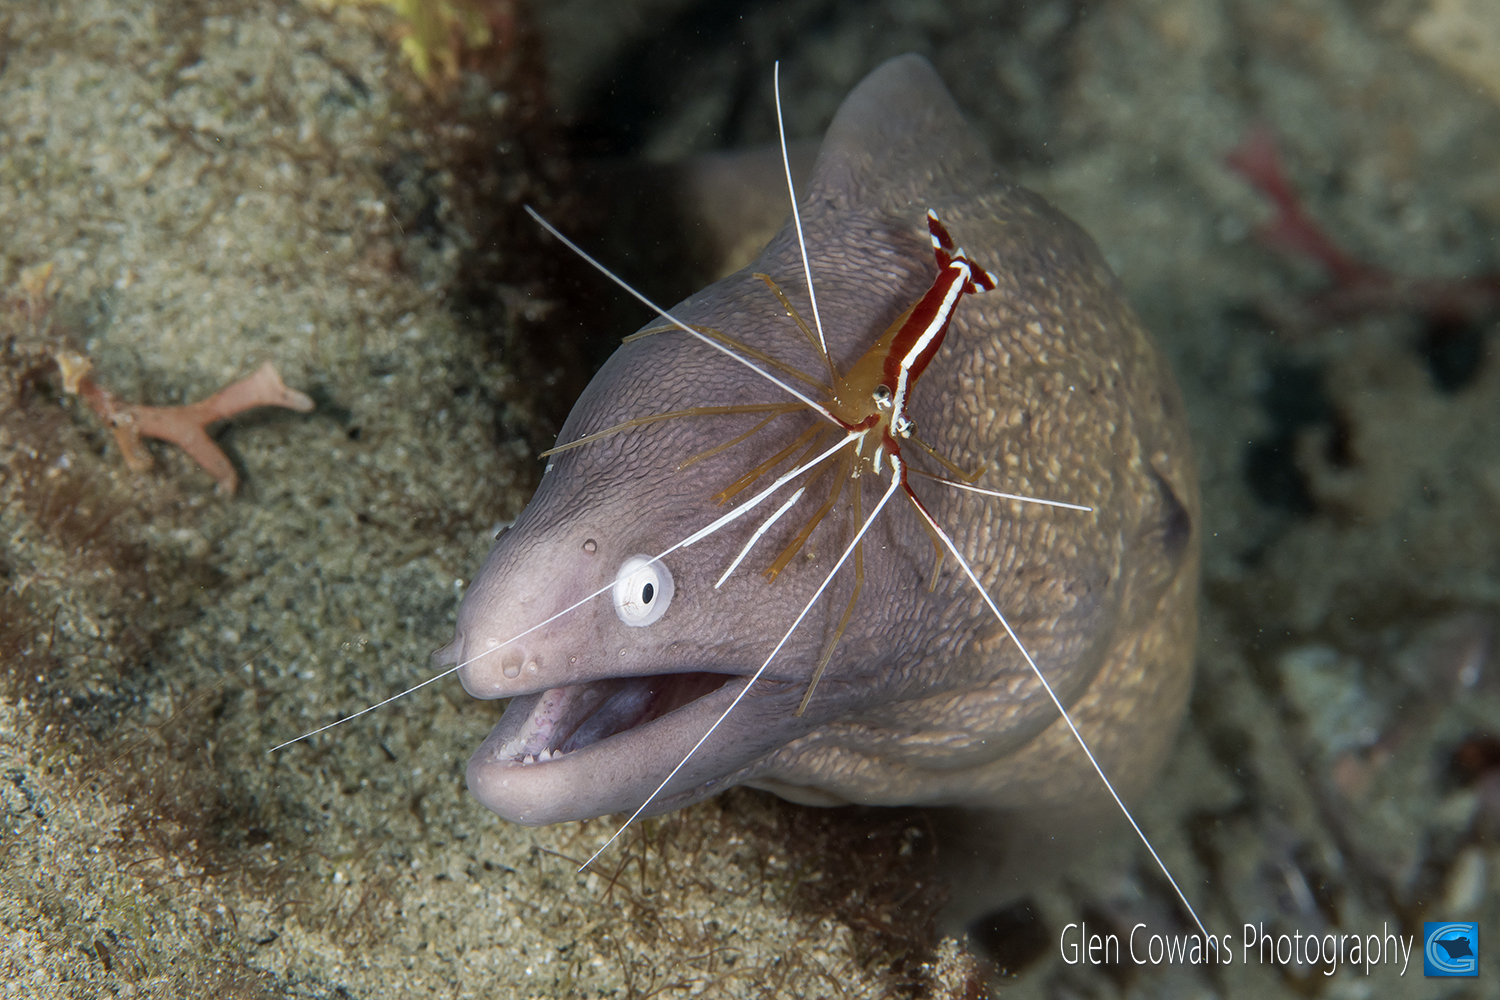 <b>White eyed moray, complete with an attentive cleaner shrimp.</b>